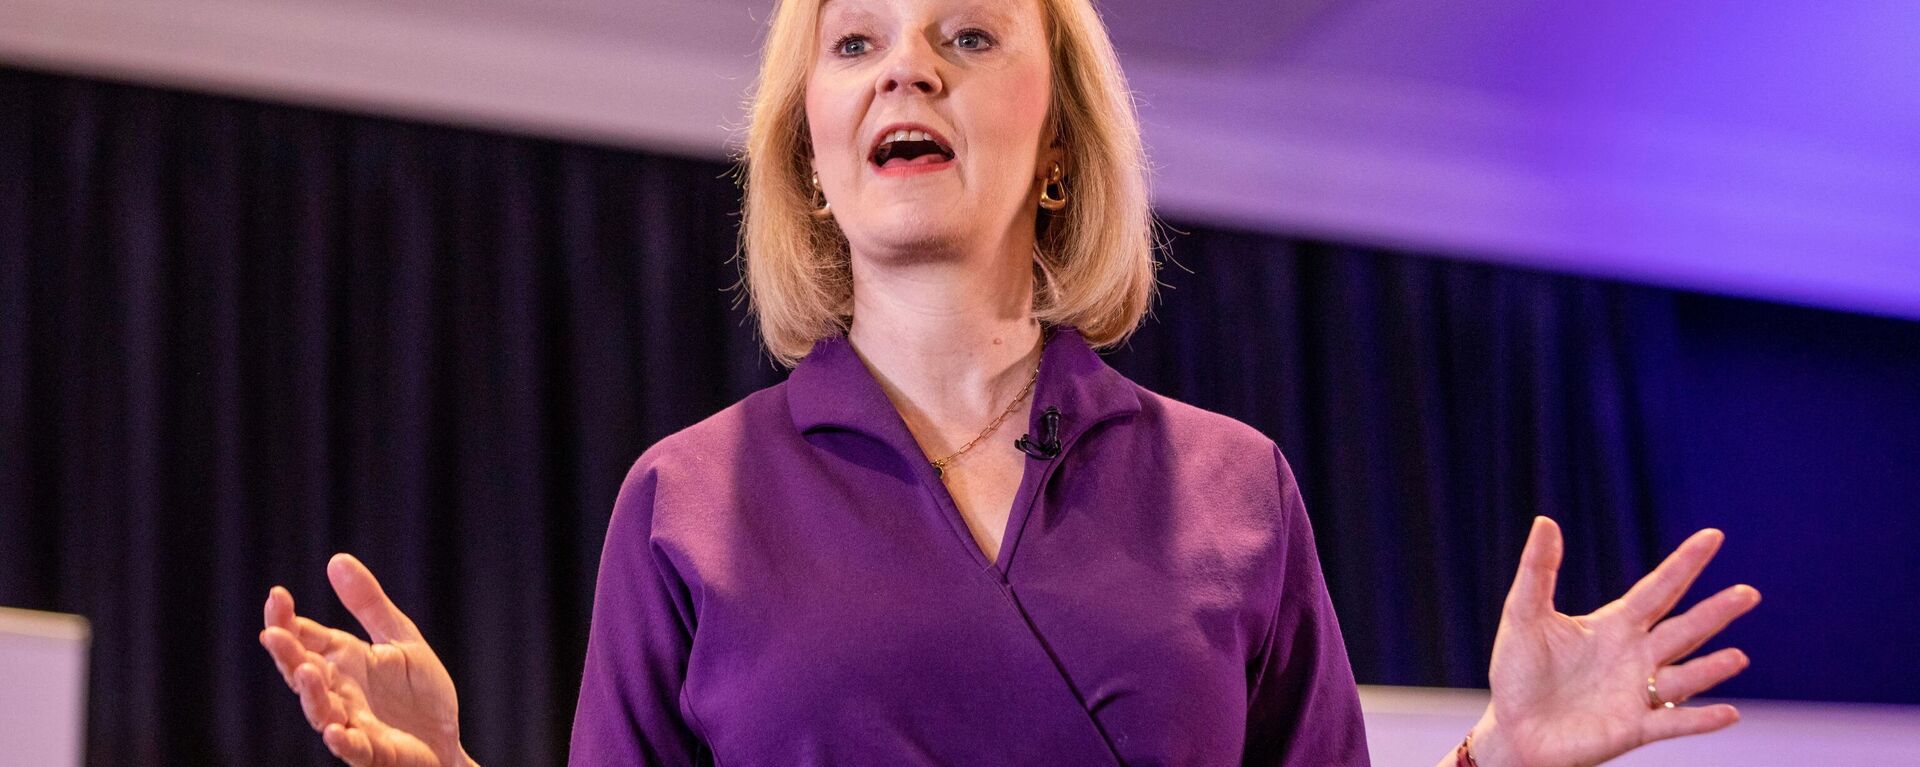 Contender to become the country's next Prime minister and leader of the Conservative party British Foreign Secretary Liz Truss speaks during a Conservative Party Hustings event in Belfast, on August 17, 2022 - Sputnik International, 1920, 05.09.2022